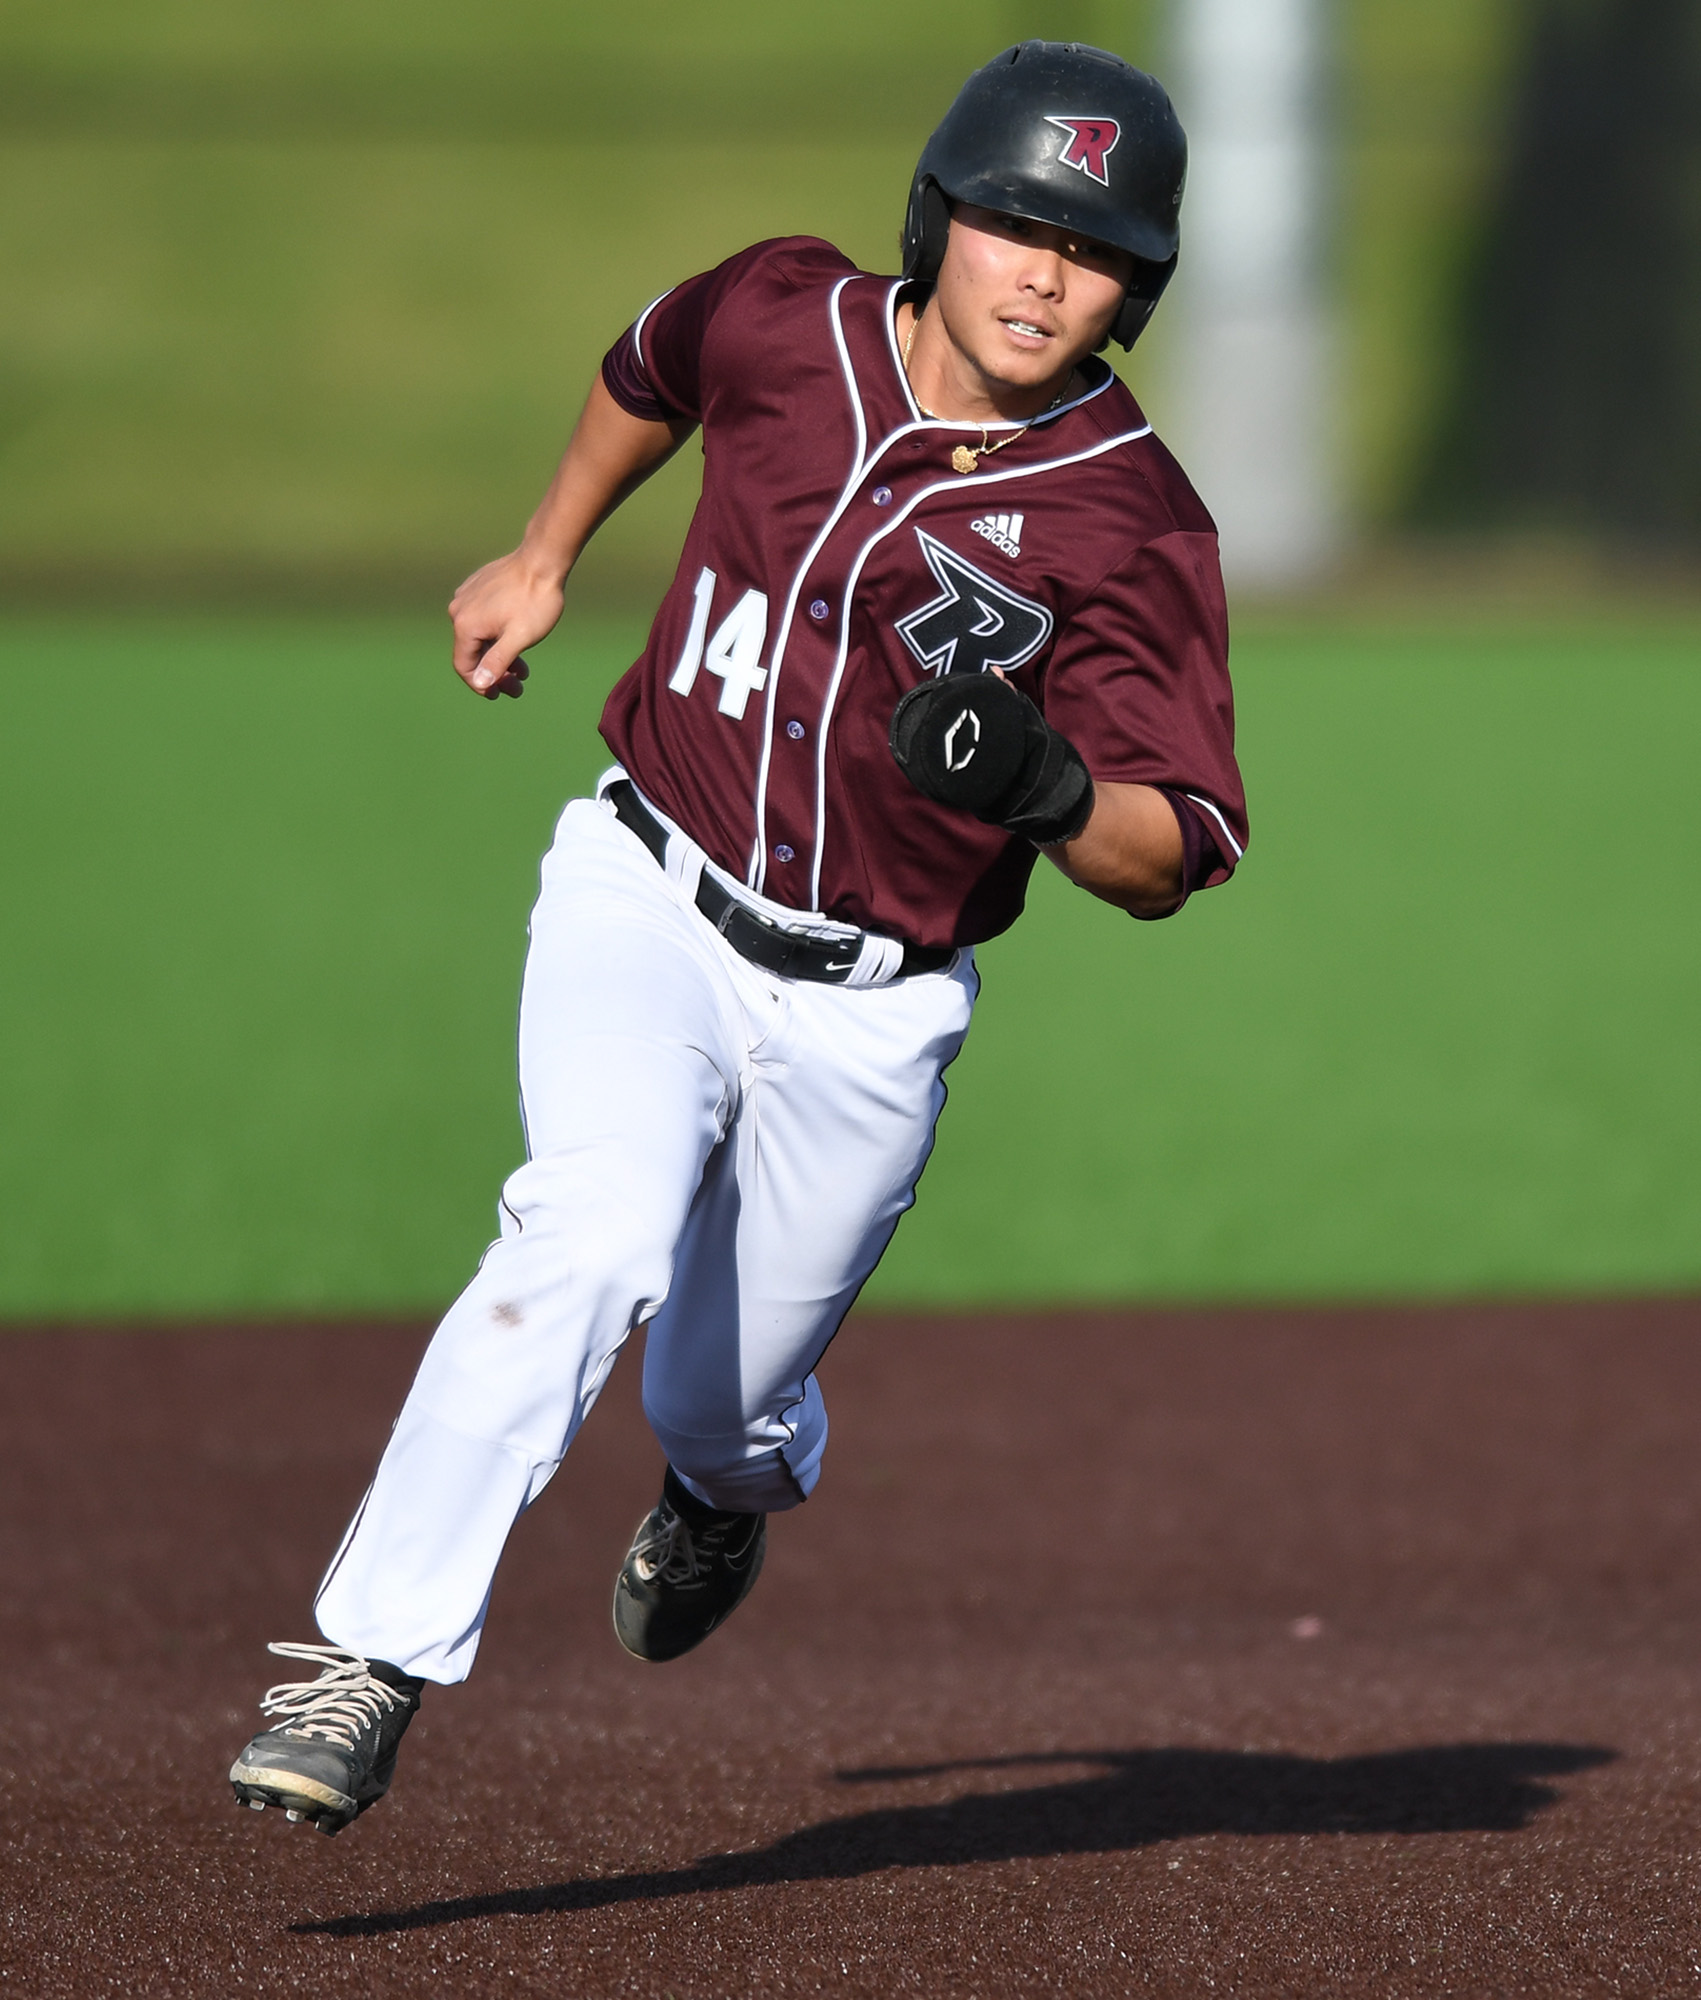 Raptors’ baserunner Jake Tsukada eyes third base Tuesday, June 14, 2022, during a Raptors game against the Edmonton Riverhawks at the Ridgefield Outdoor Recreation Complex.